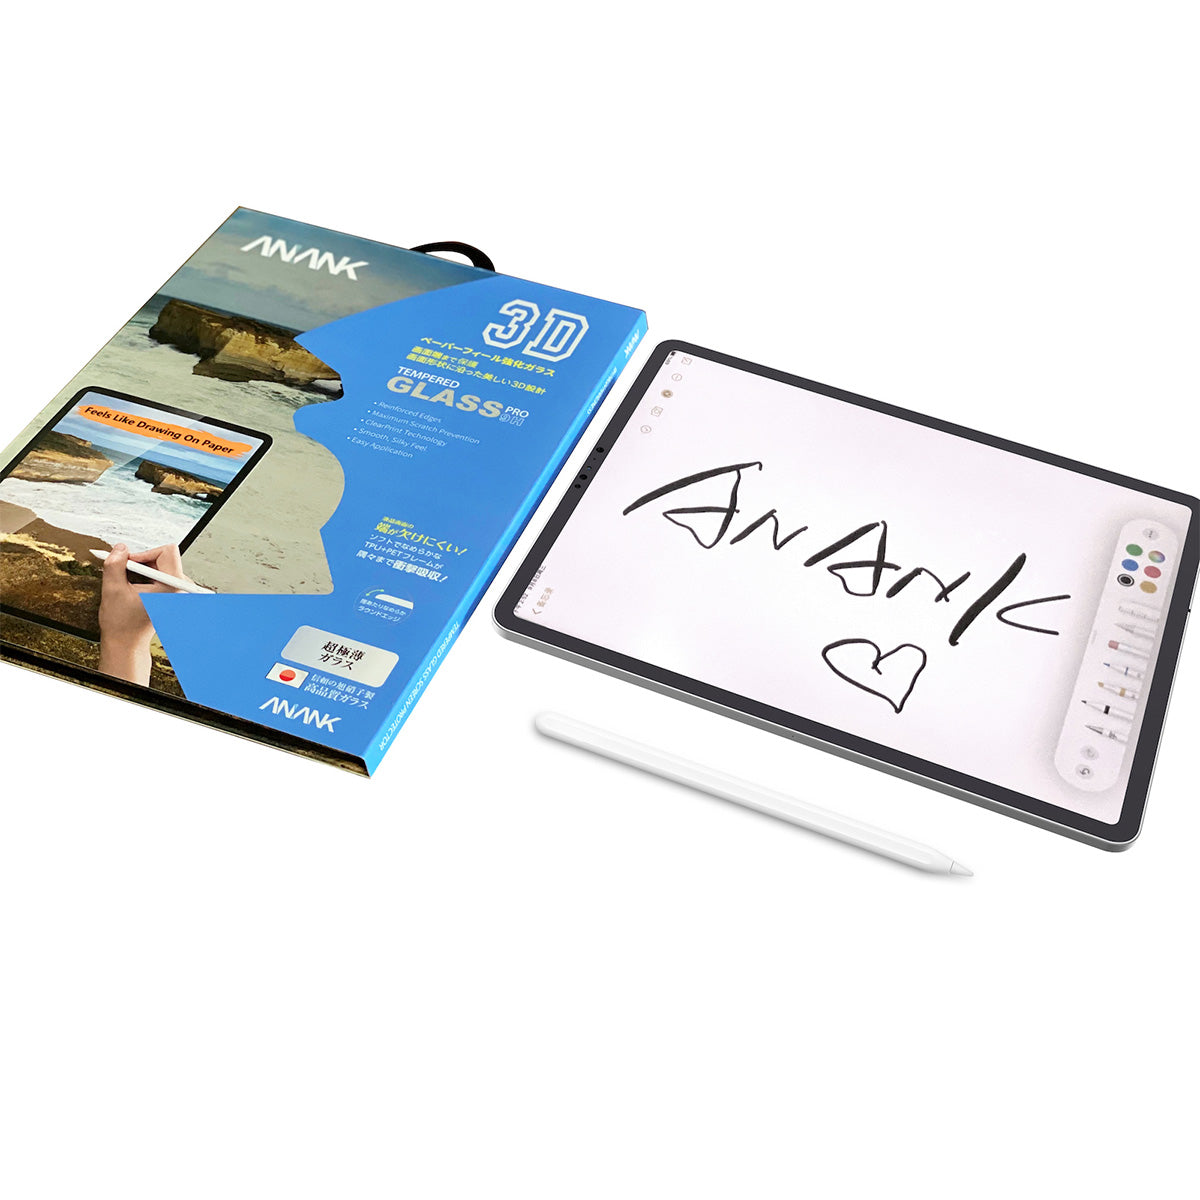 ANANK Curved PaperLike Tempered Glass for iPad mini 6 8.3" (2021)